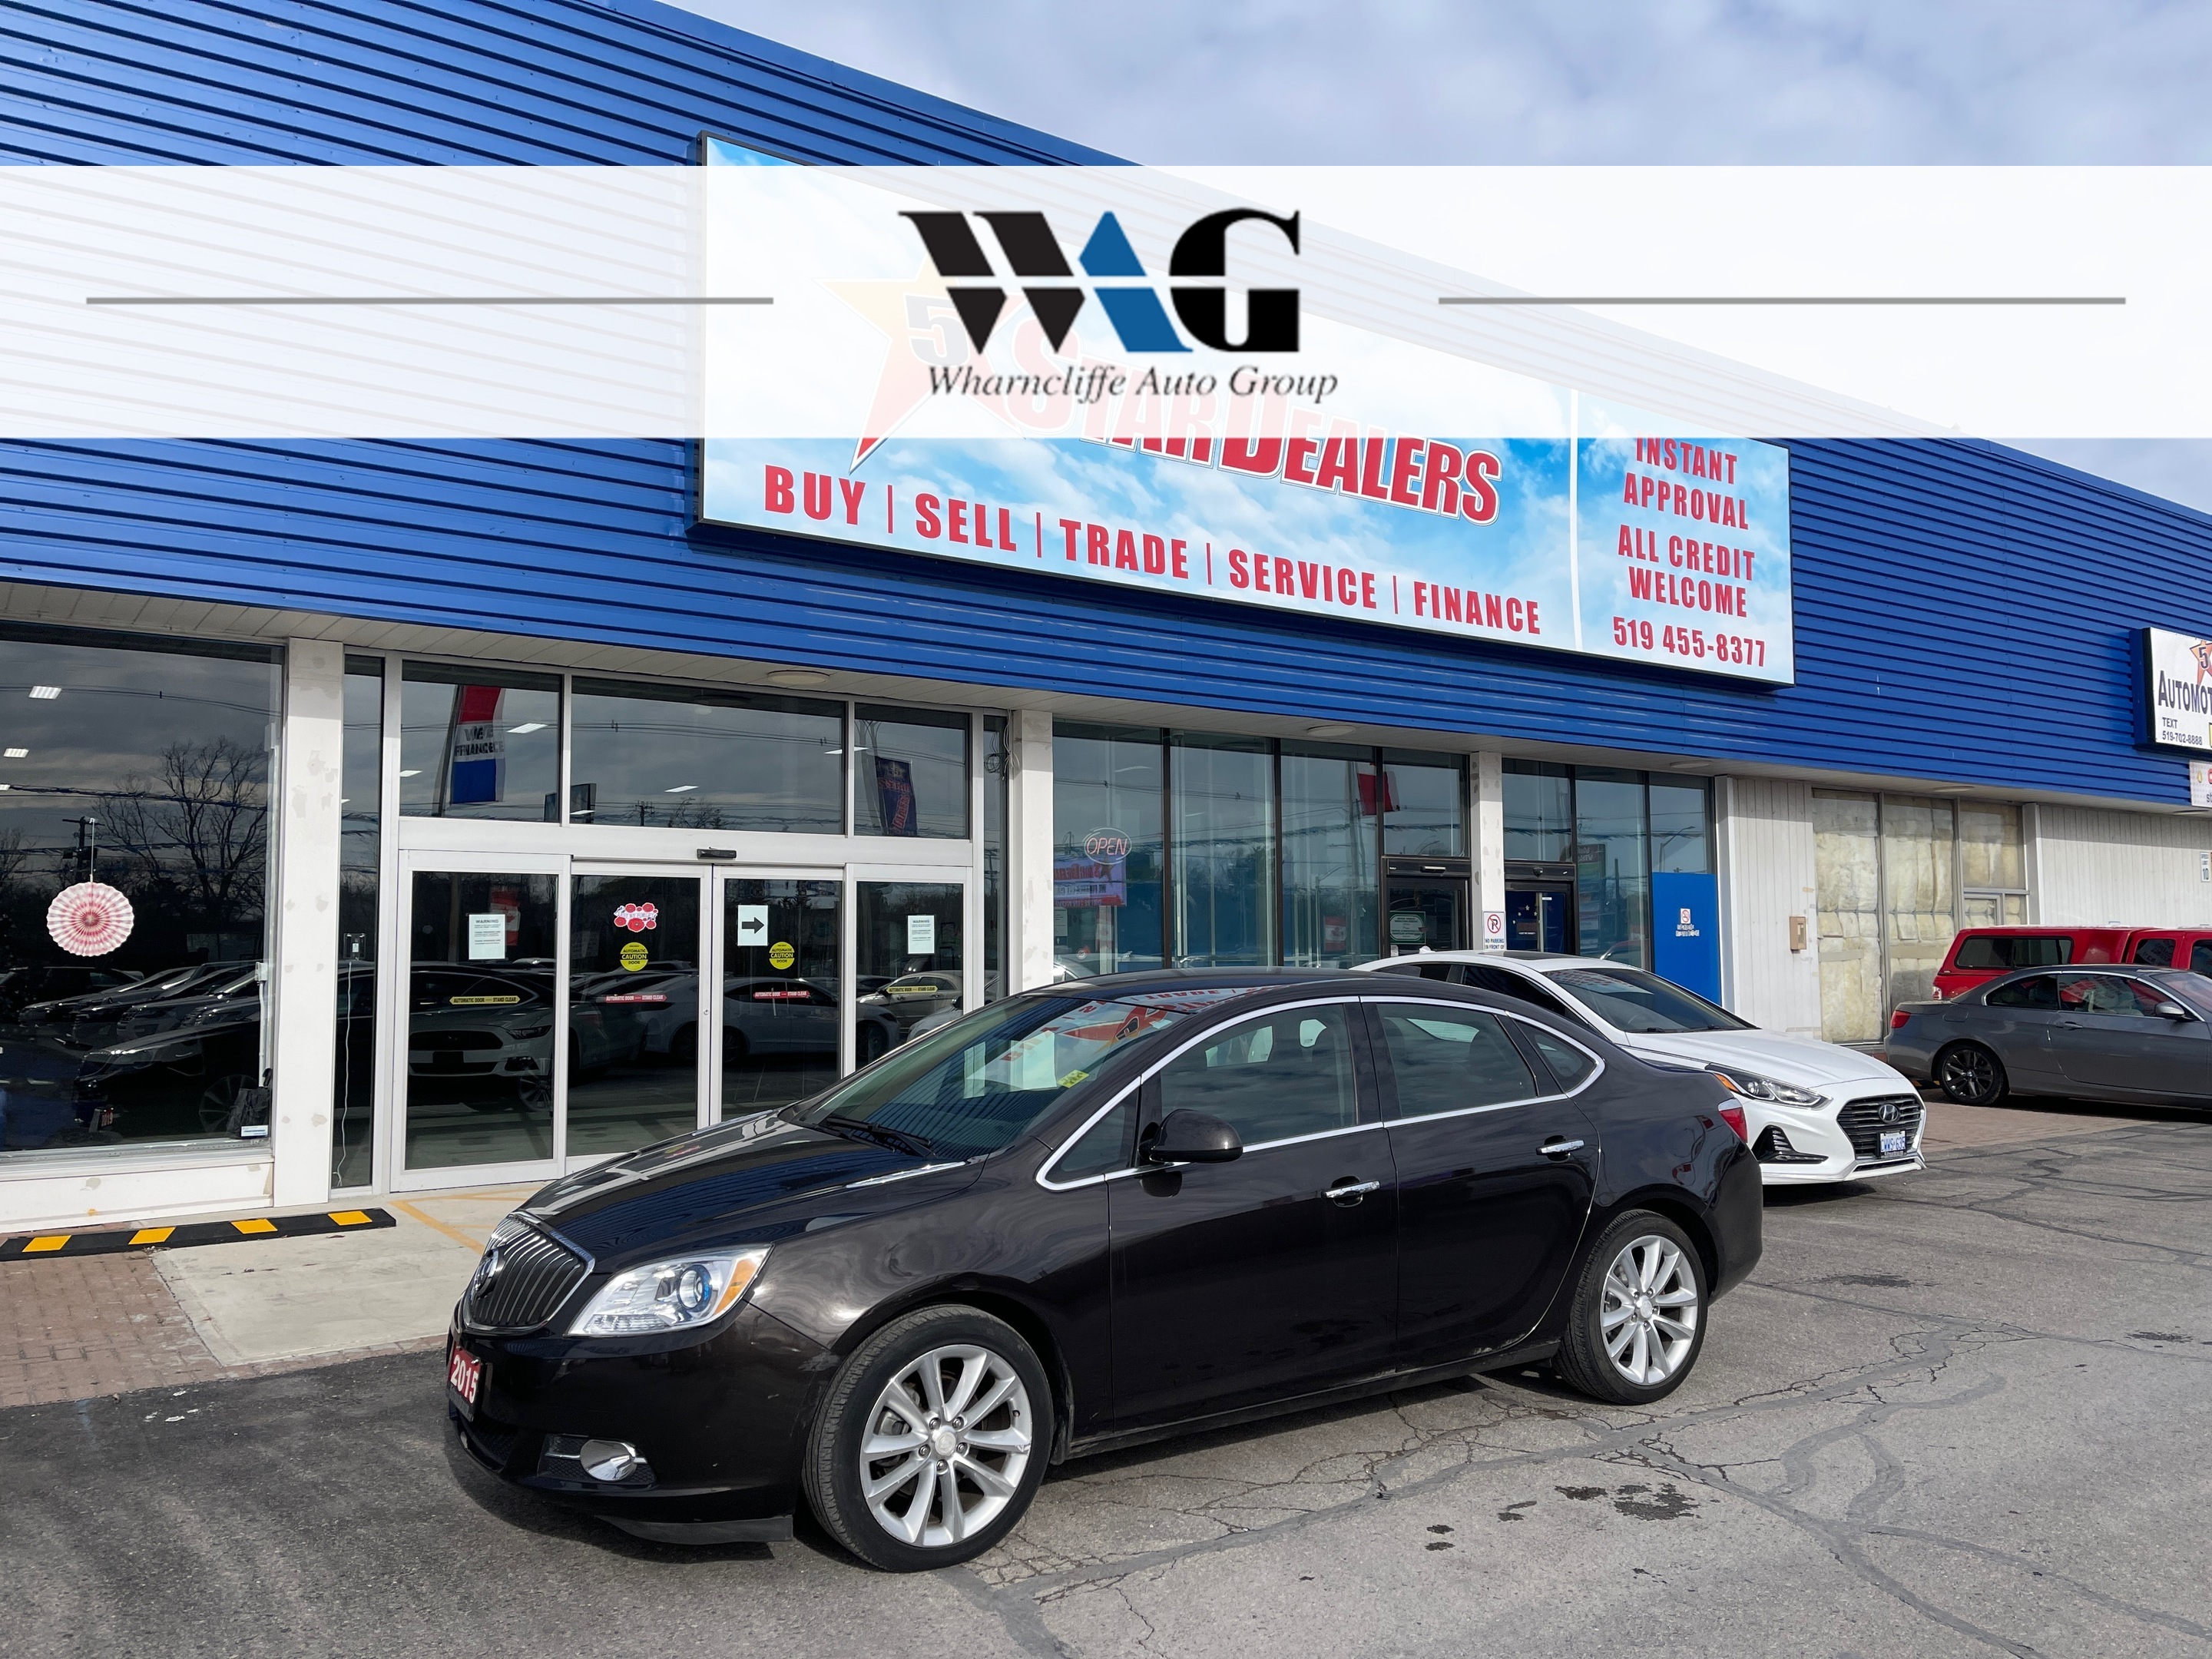 2015 Buick Verano NAV LEATHER H-SEATS LOADED! WE FINANCE ALL CREDIT!